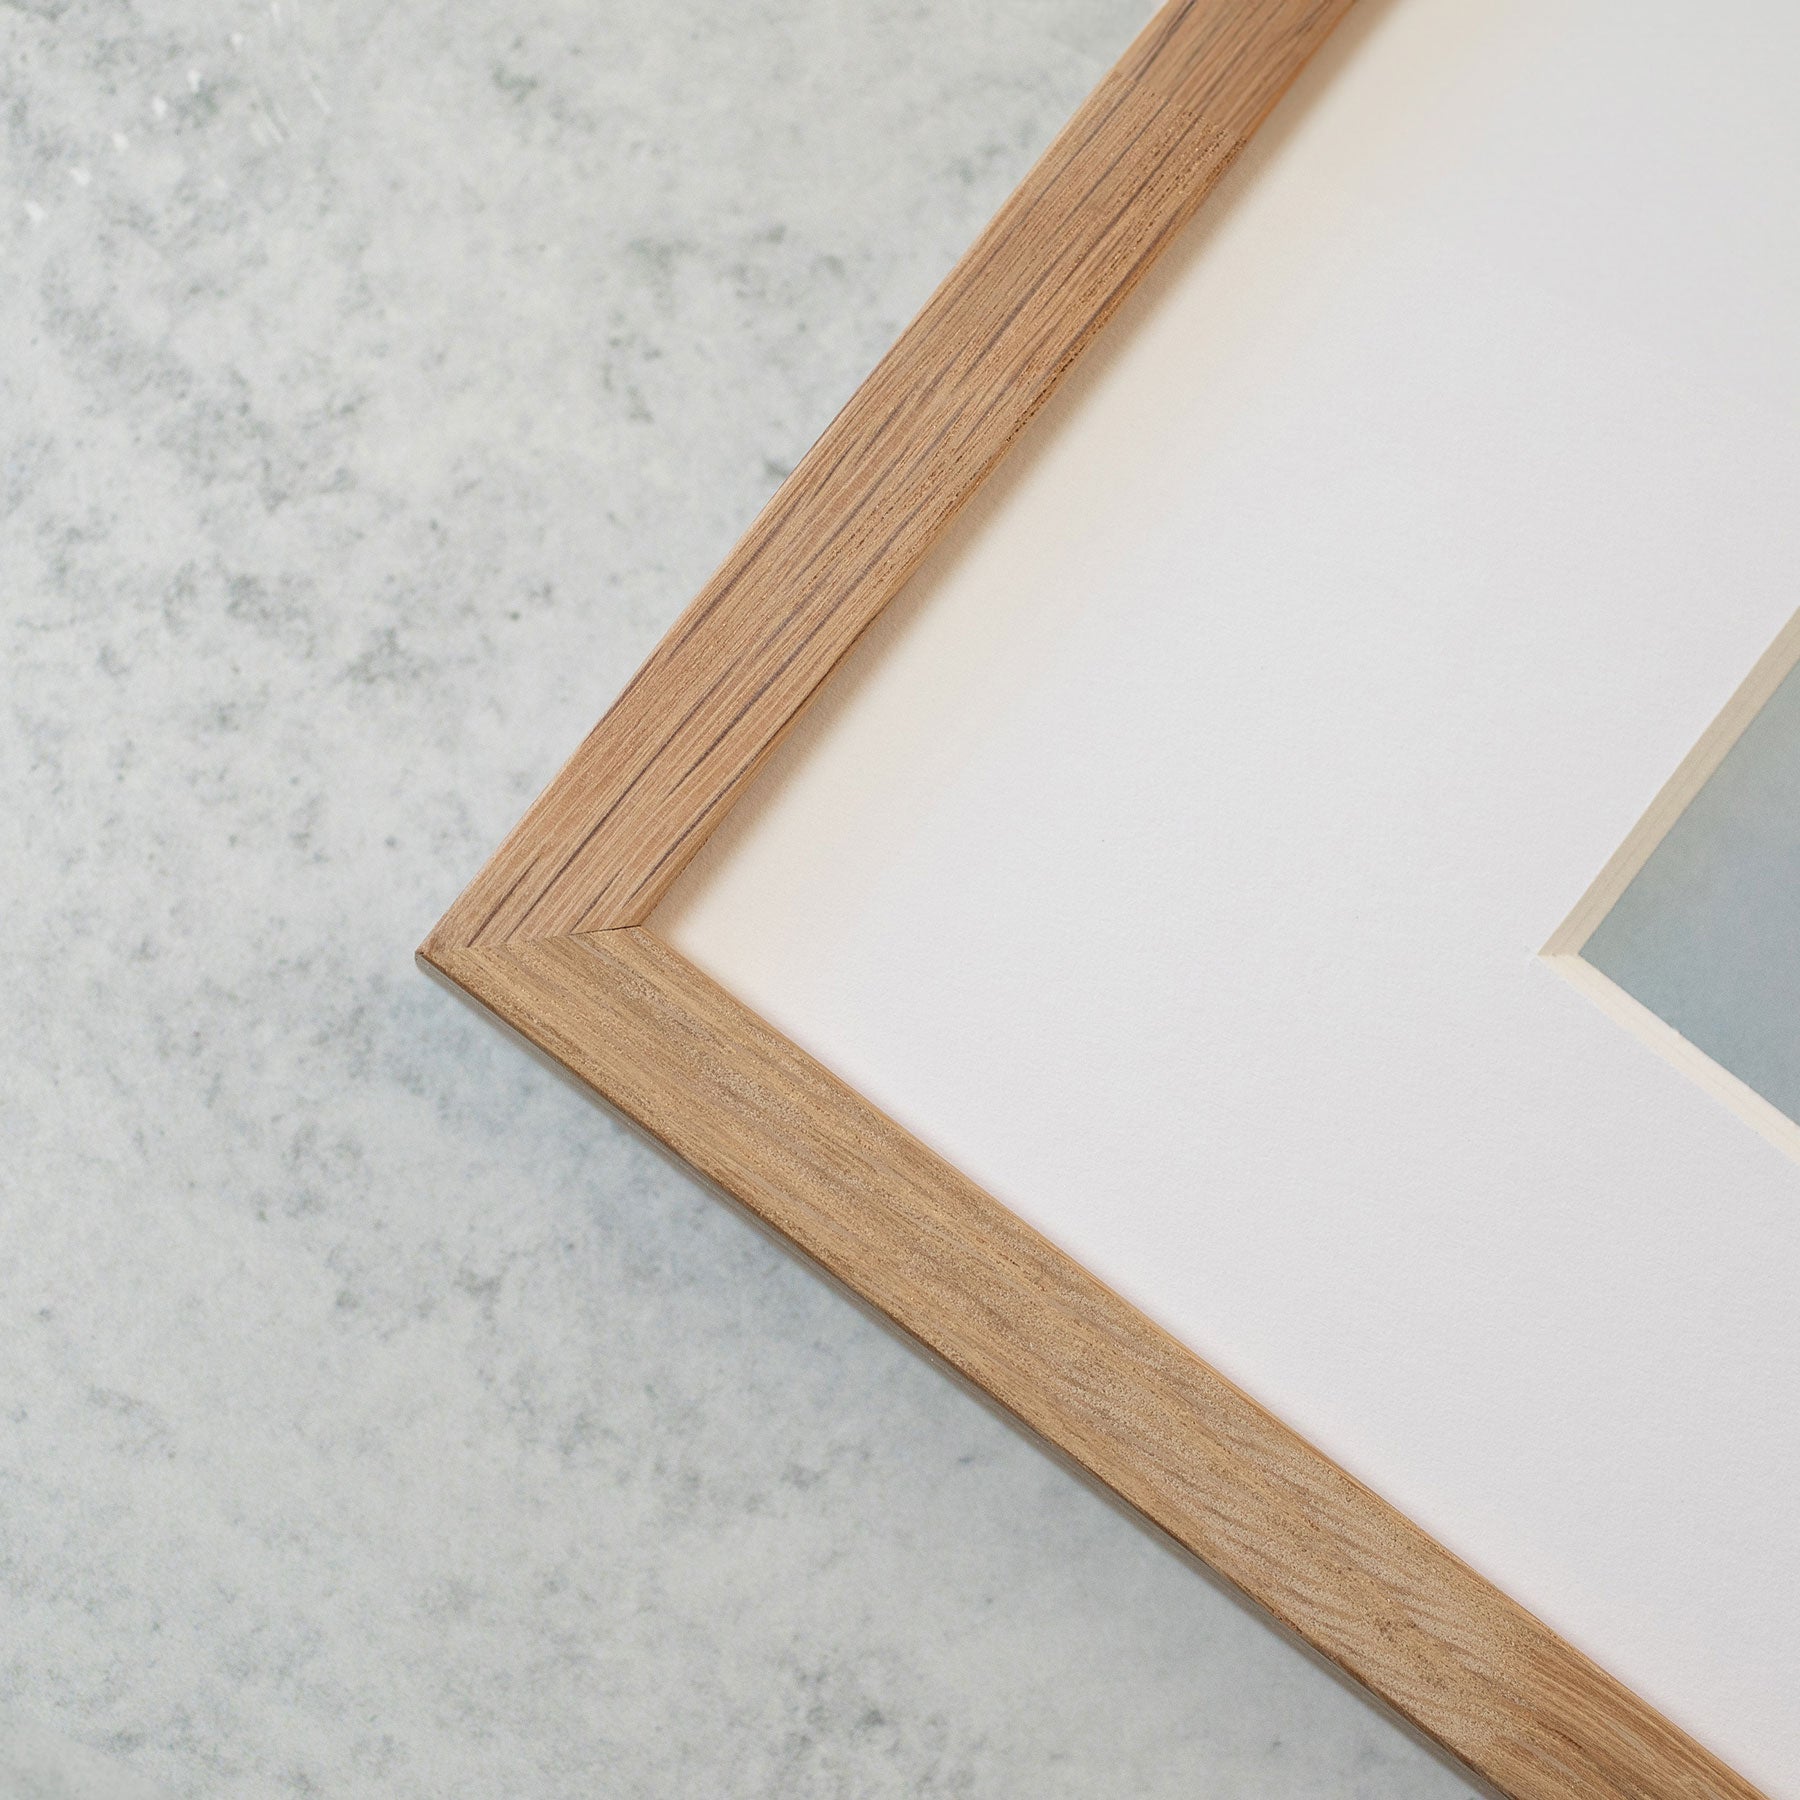 Close-up of a wooden picture frame corner resting on a light gray speckled surface. The frame has a clean, simple design and a natural wood finish. Inside the frame, Offley Green&#39;s &#39;Fields of Lavender&#39; Rustic Floral Print is partially visible, featuring a light-colored background.